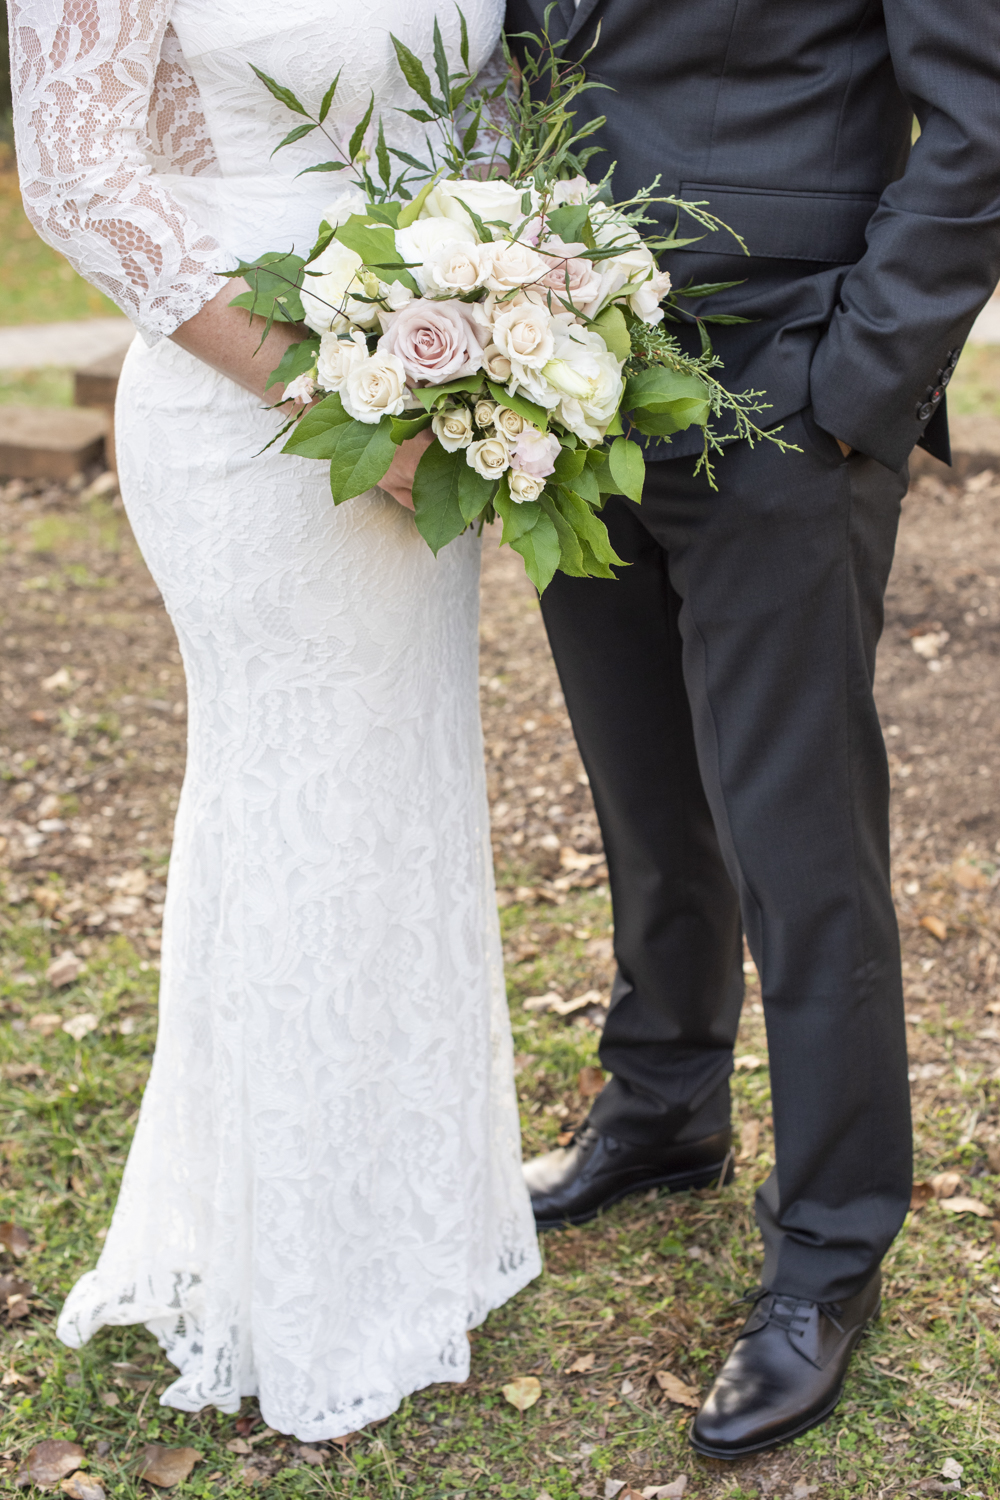 Couple's wedding attire and bouquet